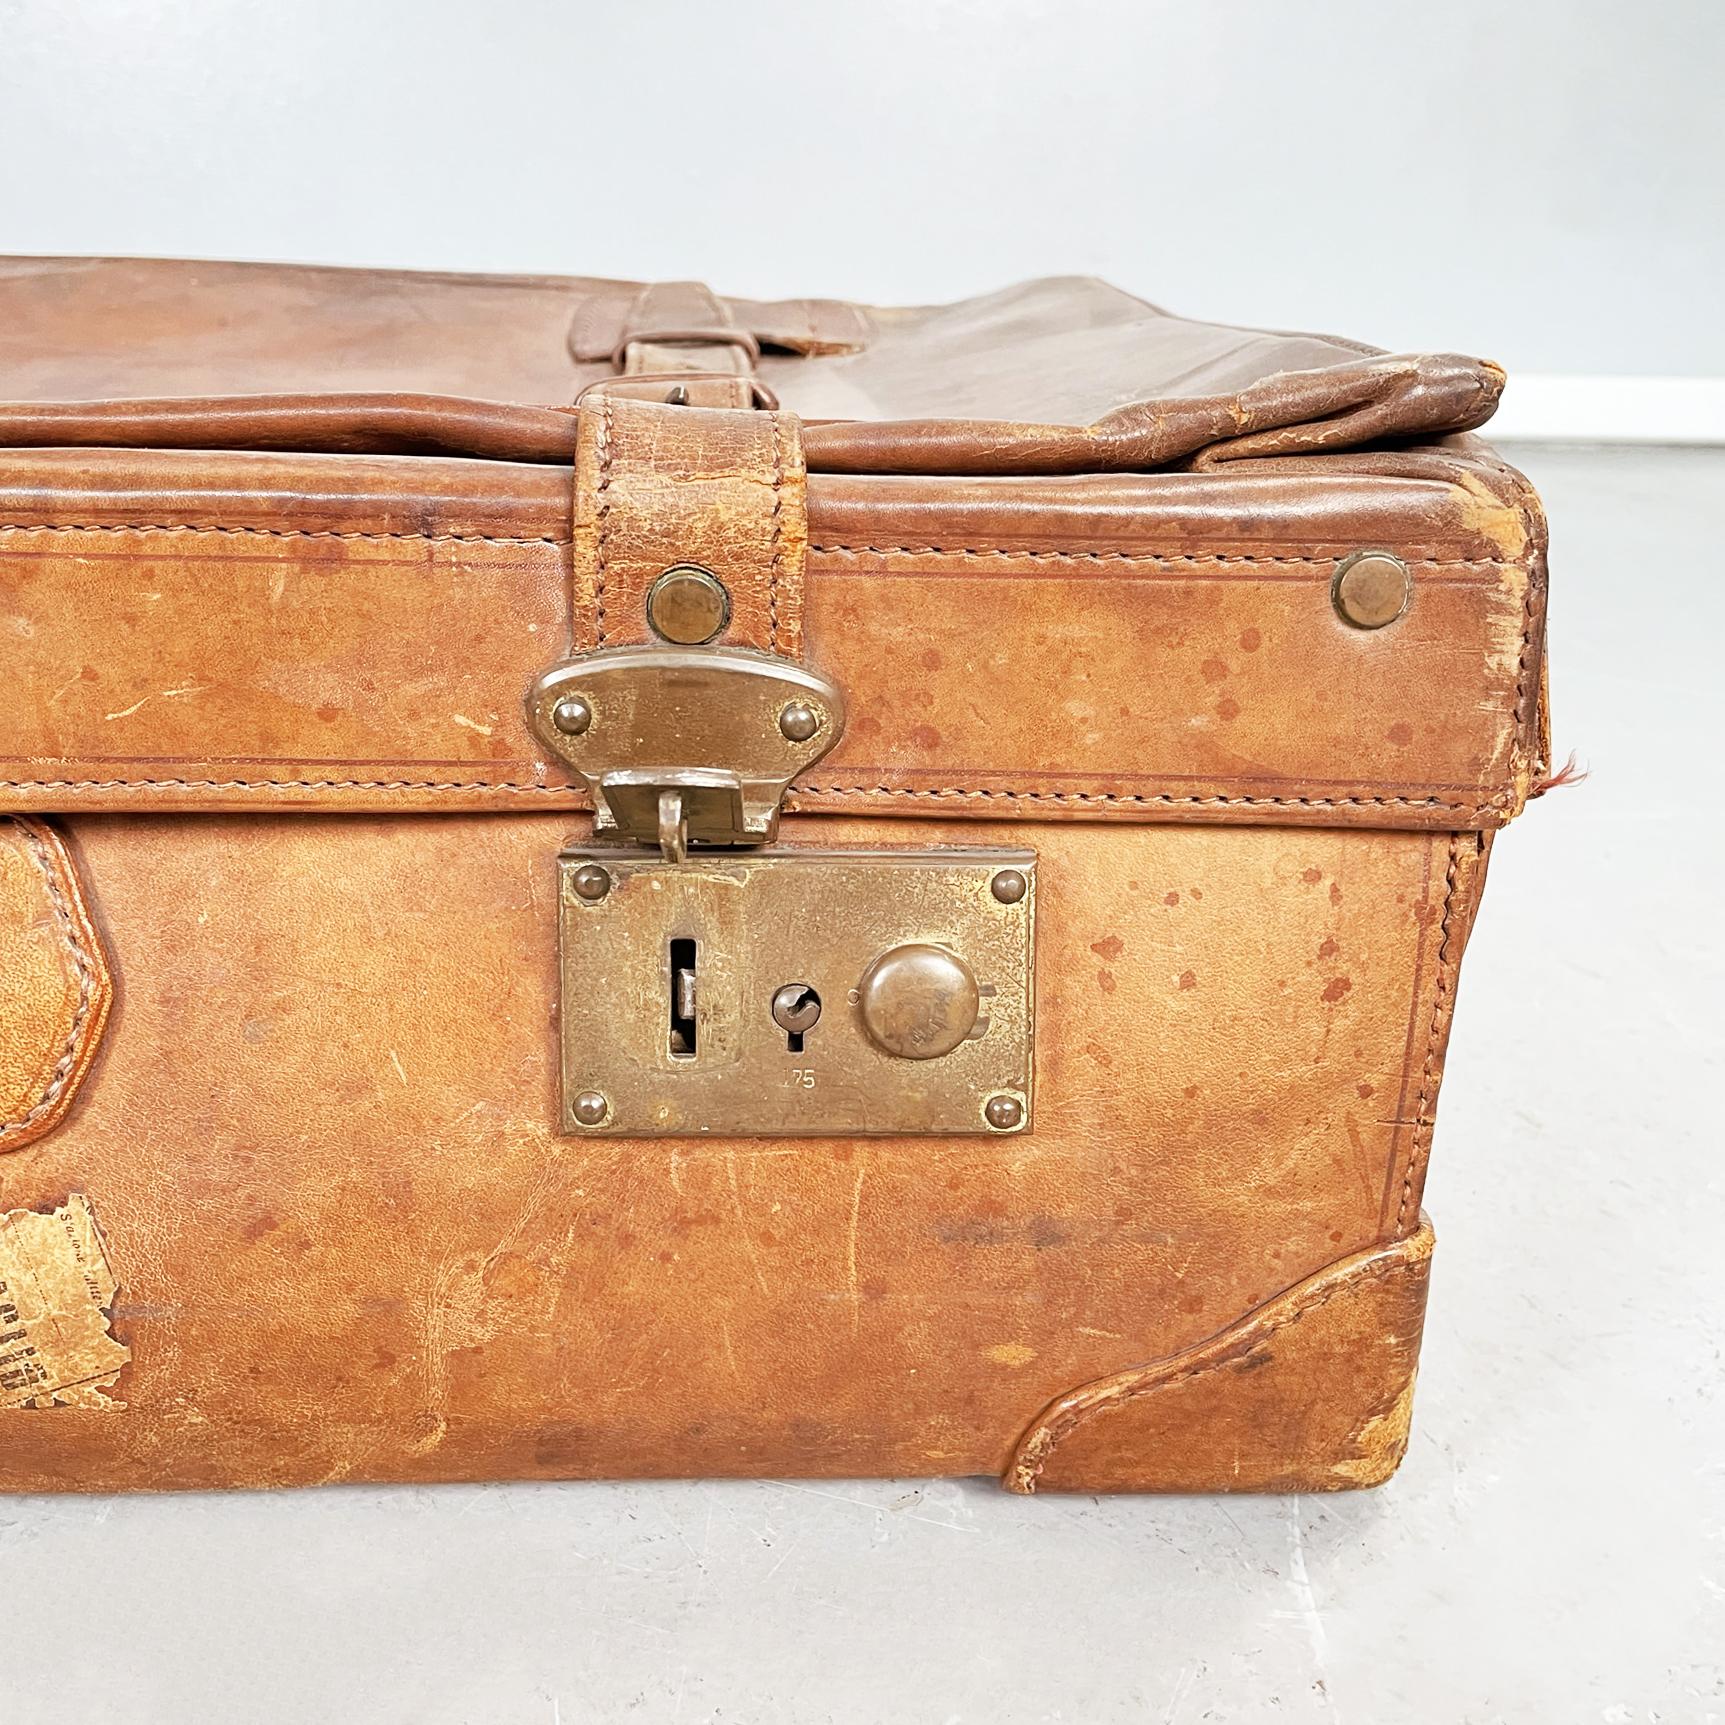 Italian Mid-Century Modern Luggage in Brown Leather with Beige Fabric, 1960s For Sale 4